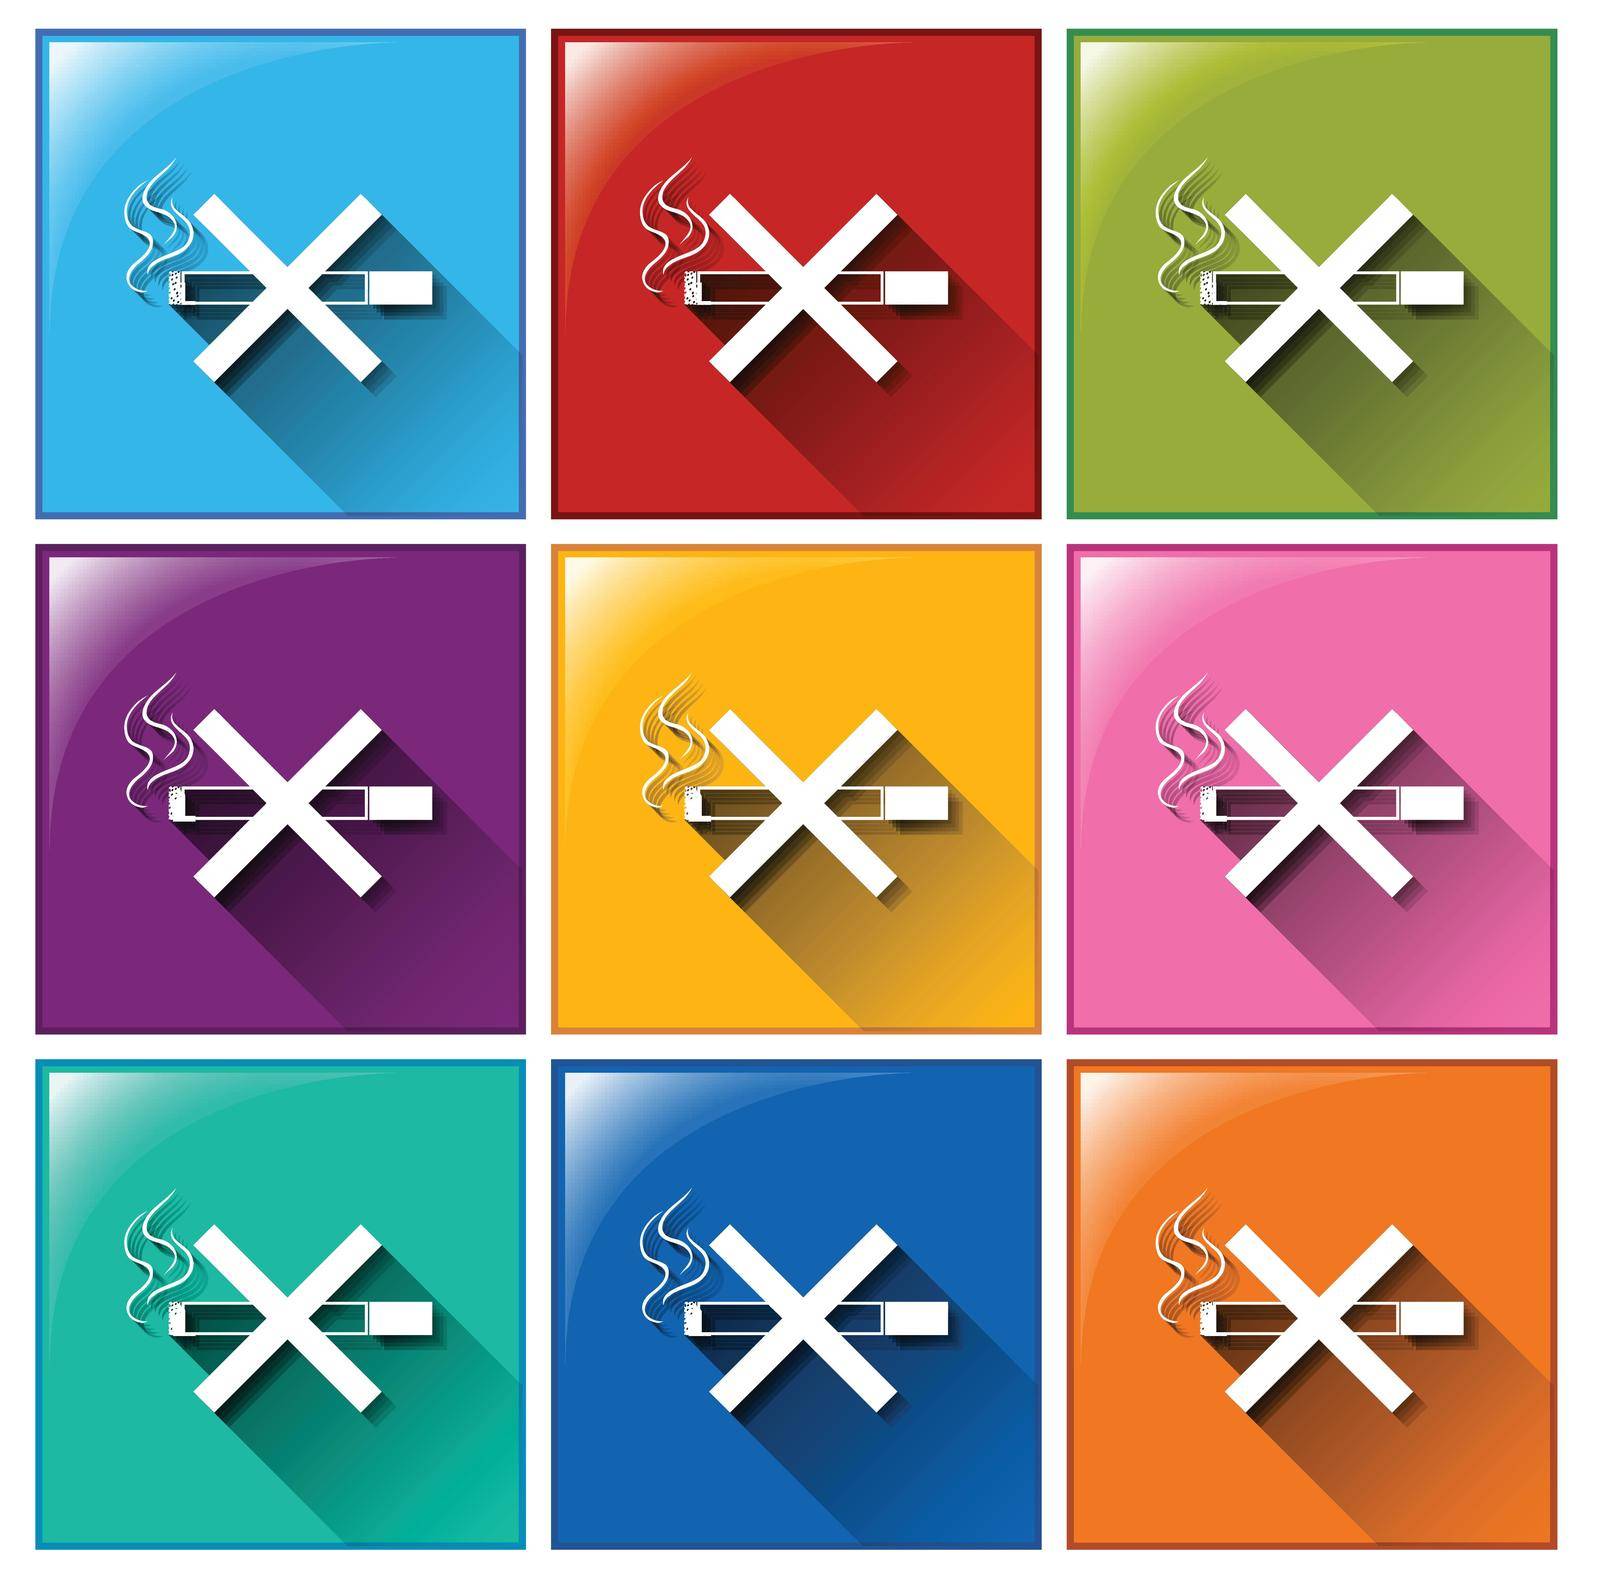 Buttons with no smoking signs on a white background